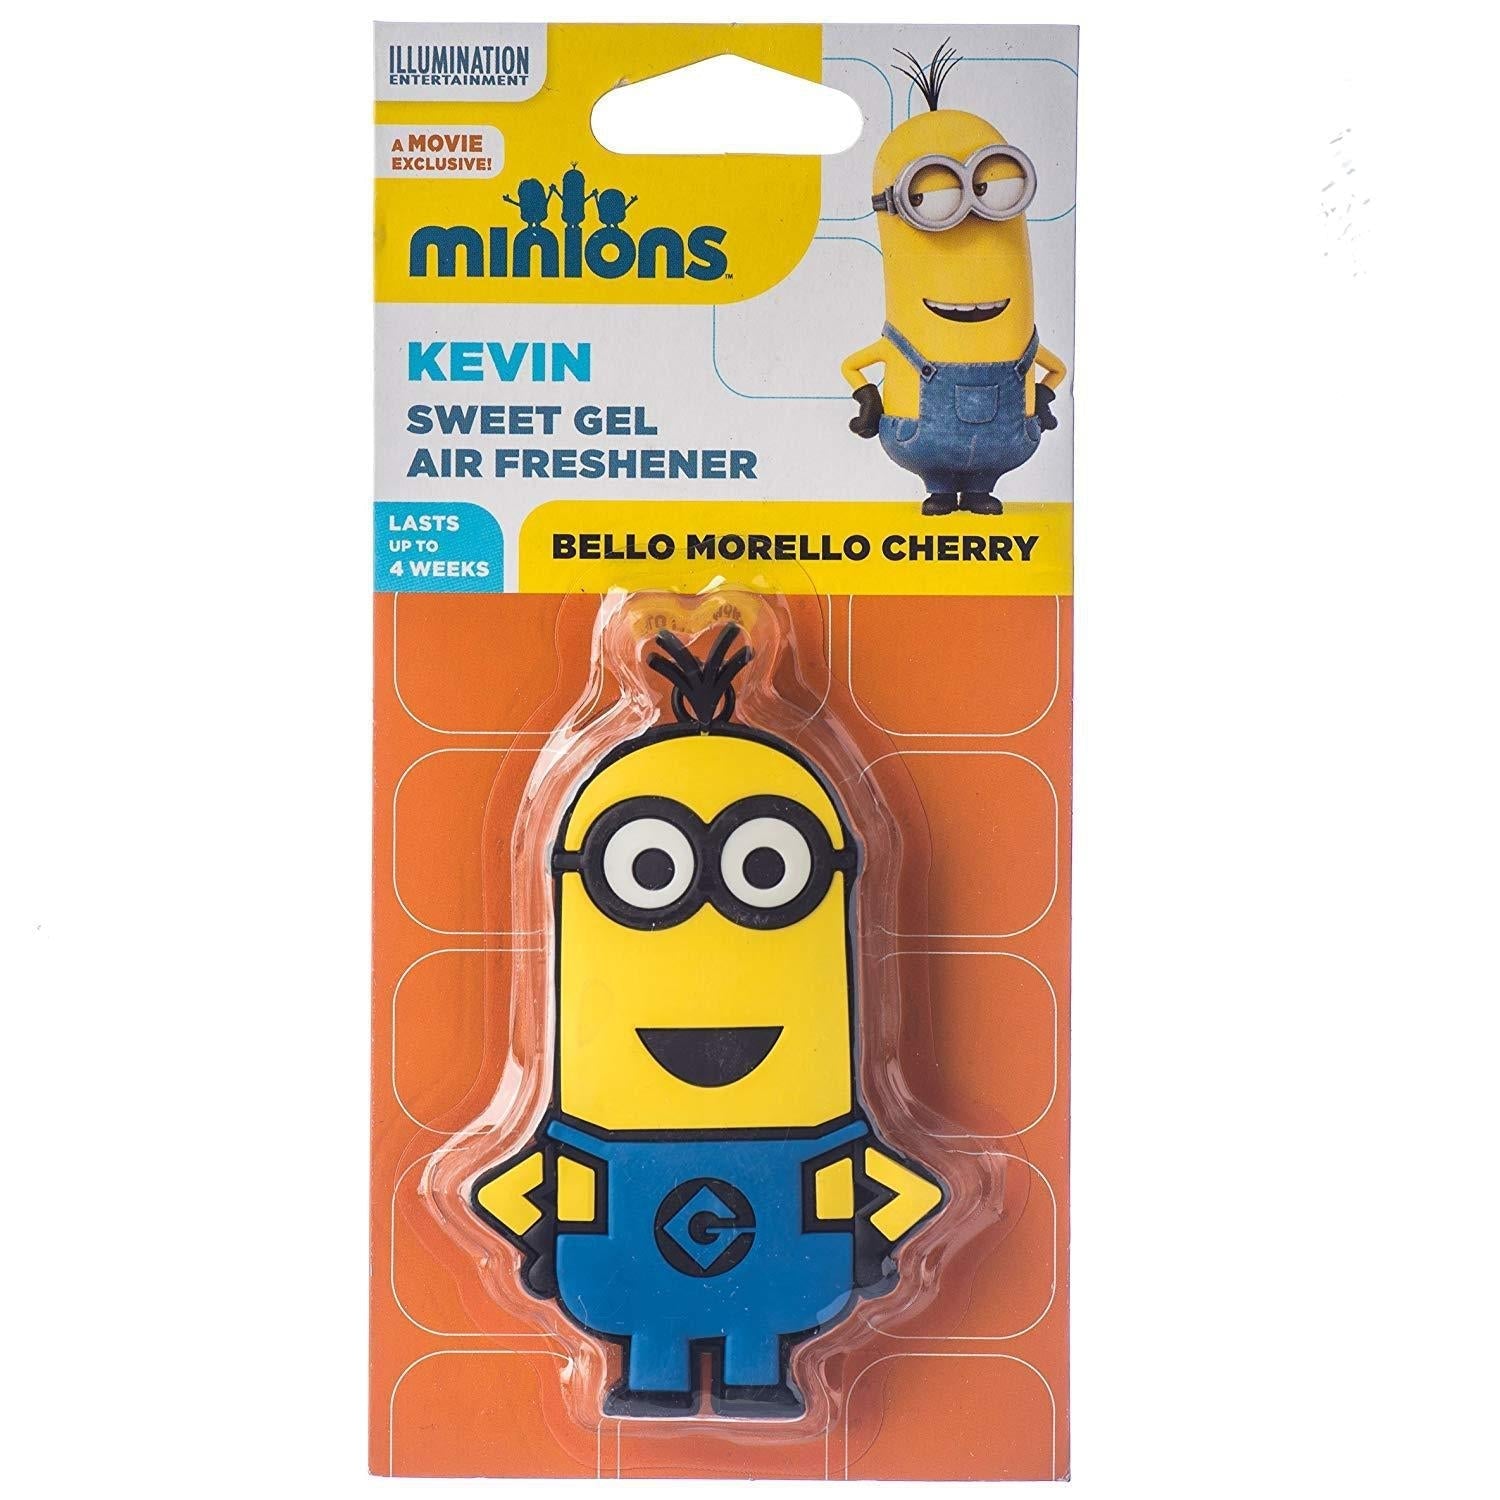 Minions-Kevin Sweet Gel-Bello Morello Air Freshener-Cherry Alliance Auto Products